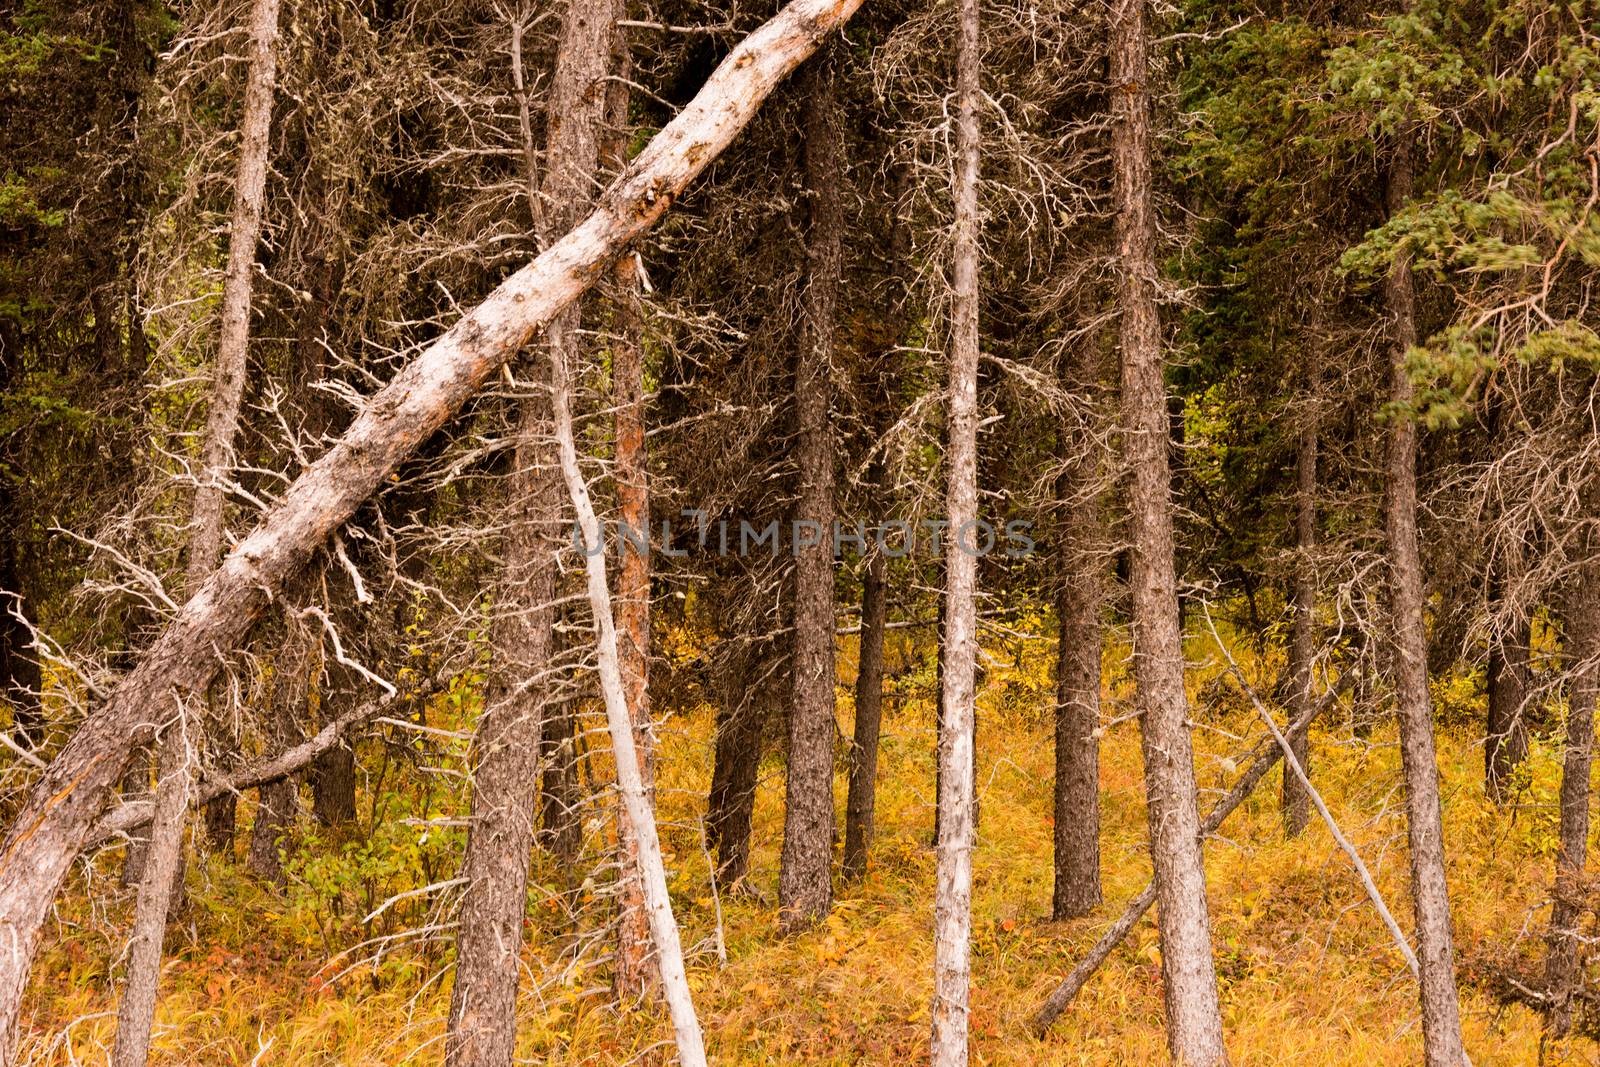 Dead Trees Fall Over Natural Forest Regenertation by ChrisBoswell